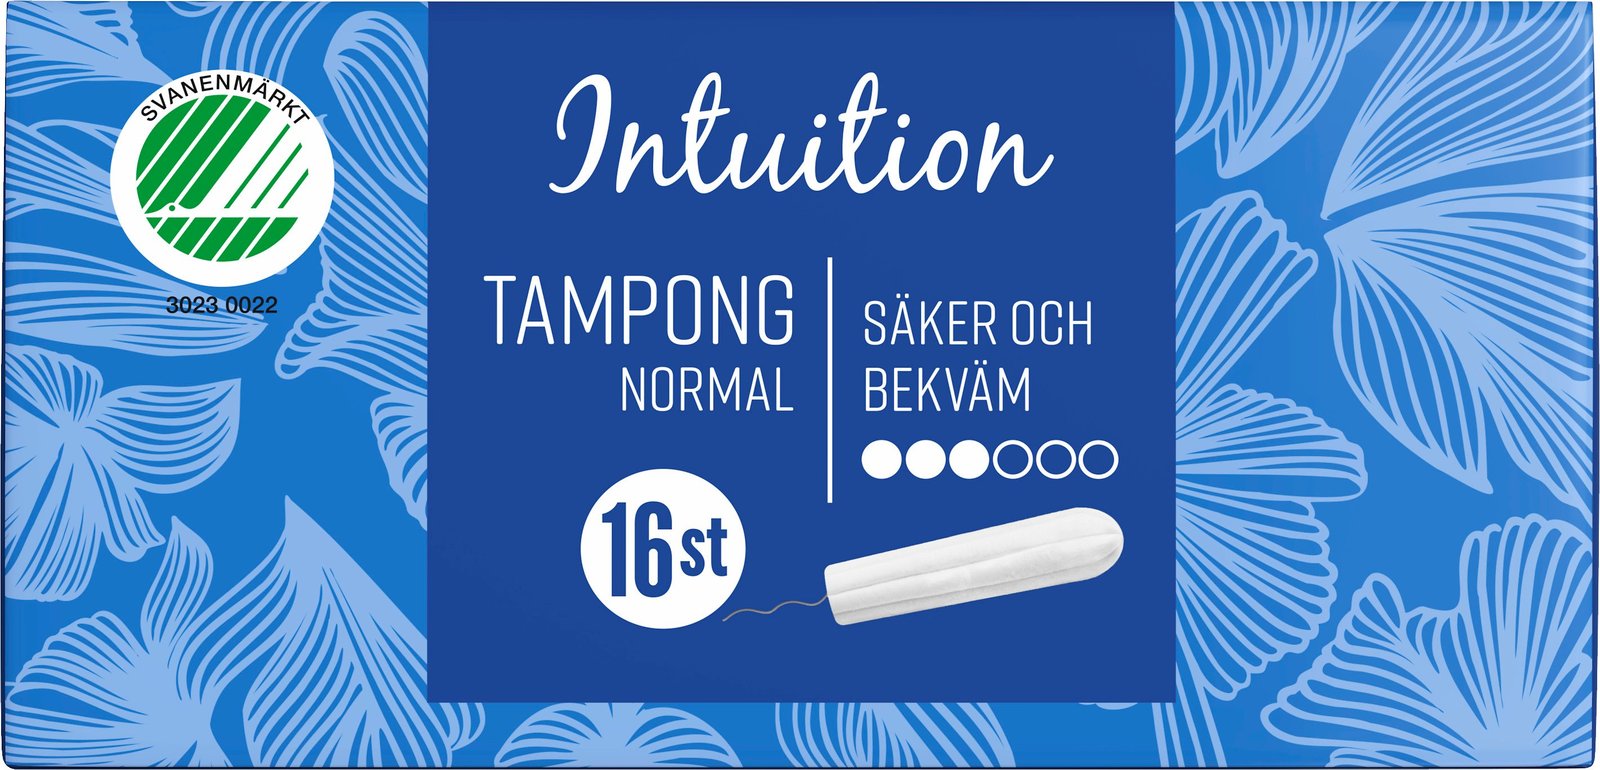 Intuition Tampong Normal 16 st